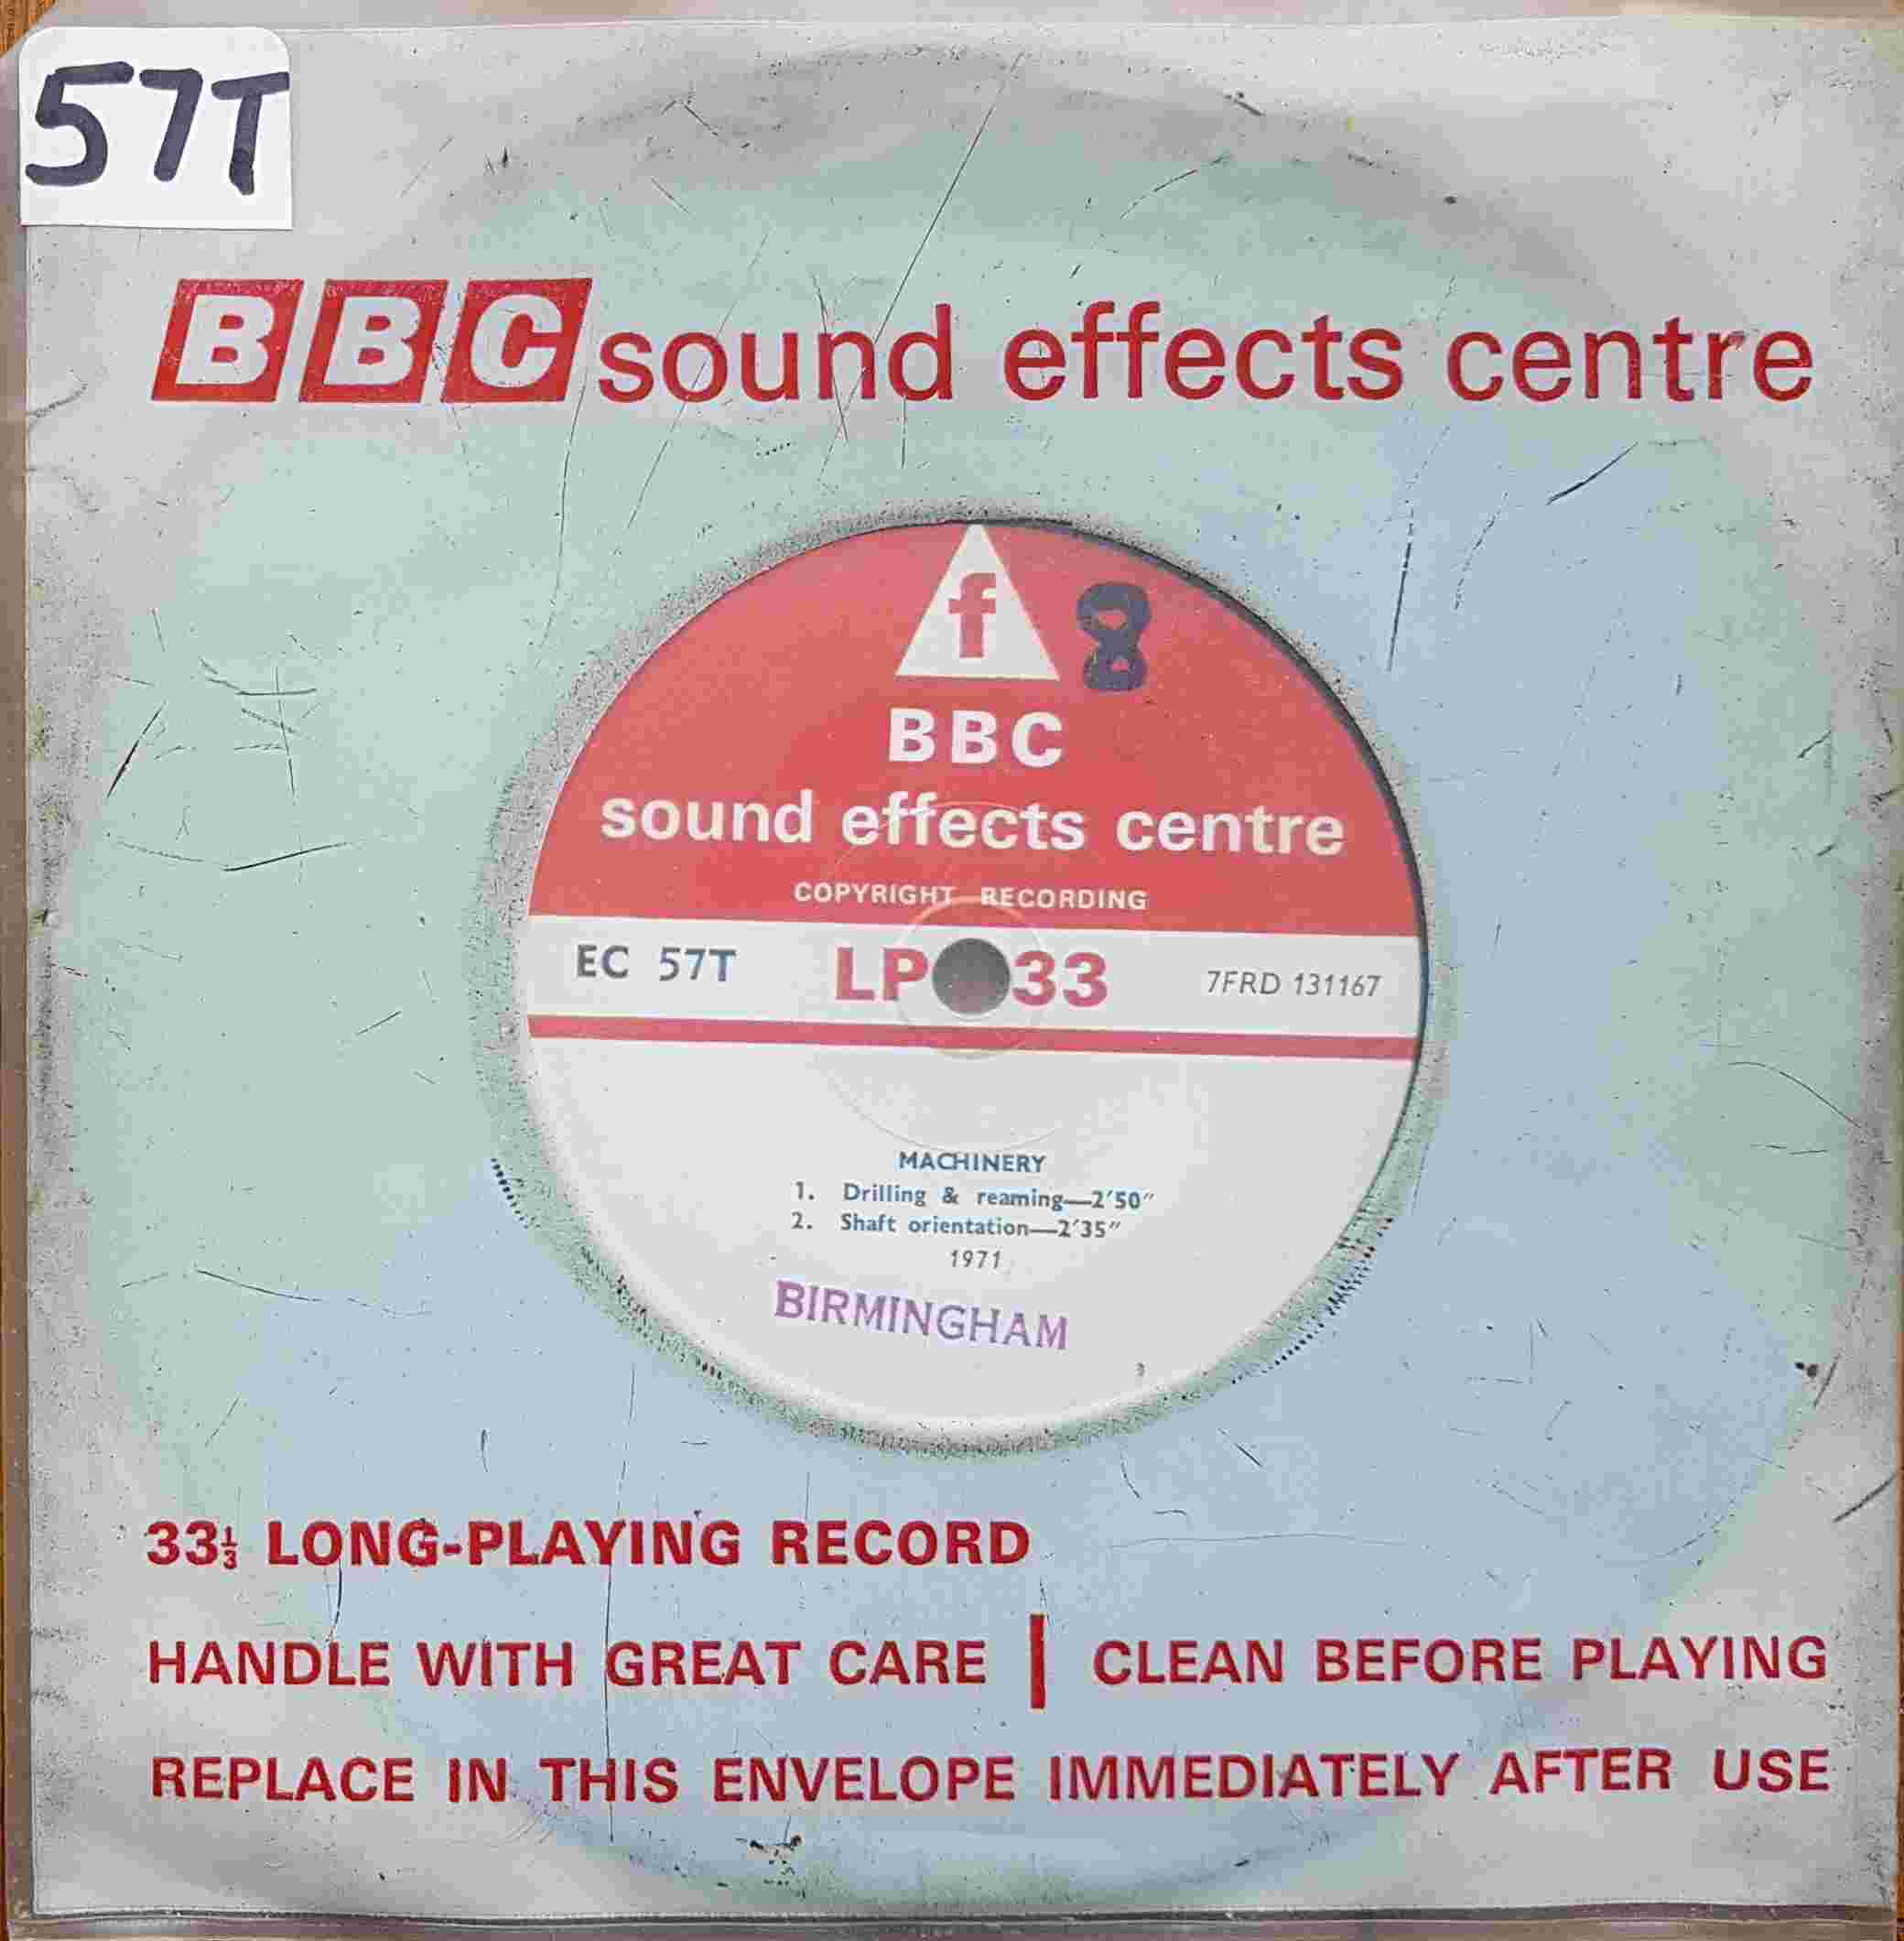 Picture of EC 57T Machinery by artist Not registered from the BBC singles - Records and Tapes library